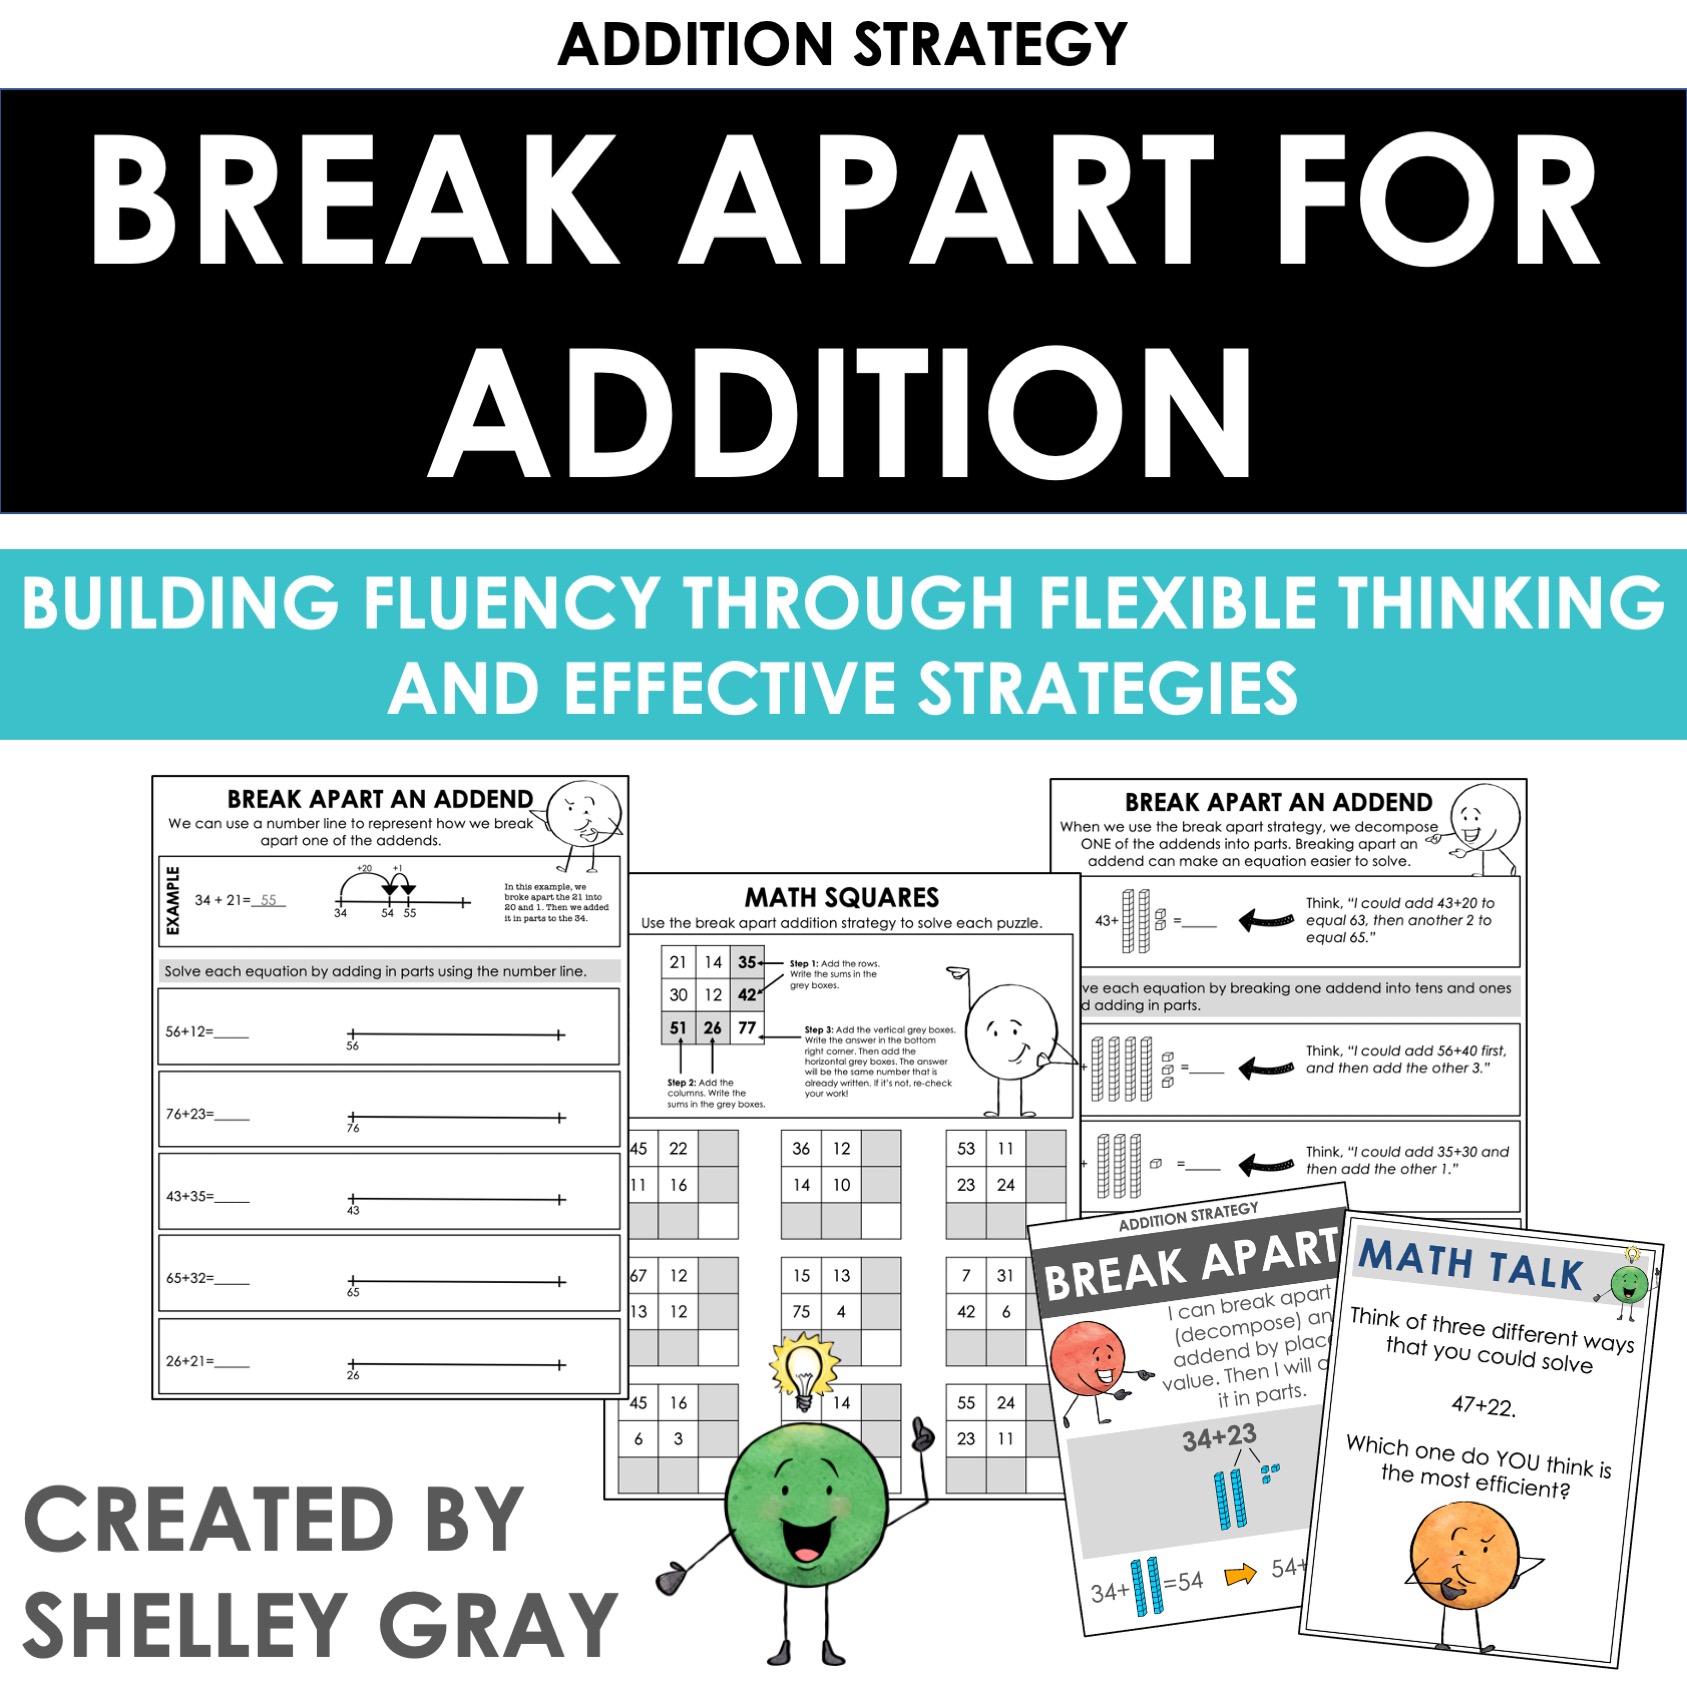 breaking-apart-an-addend-an-addition-strategy-shelley-gray